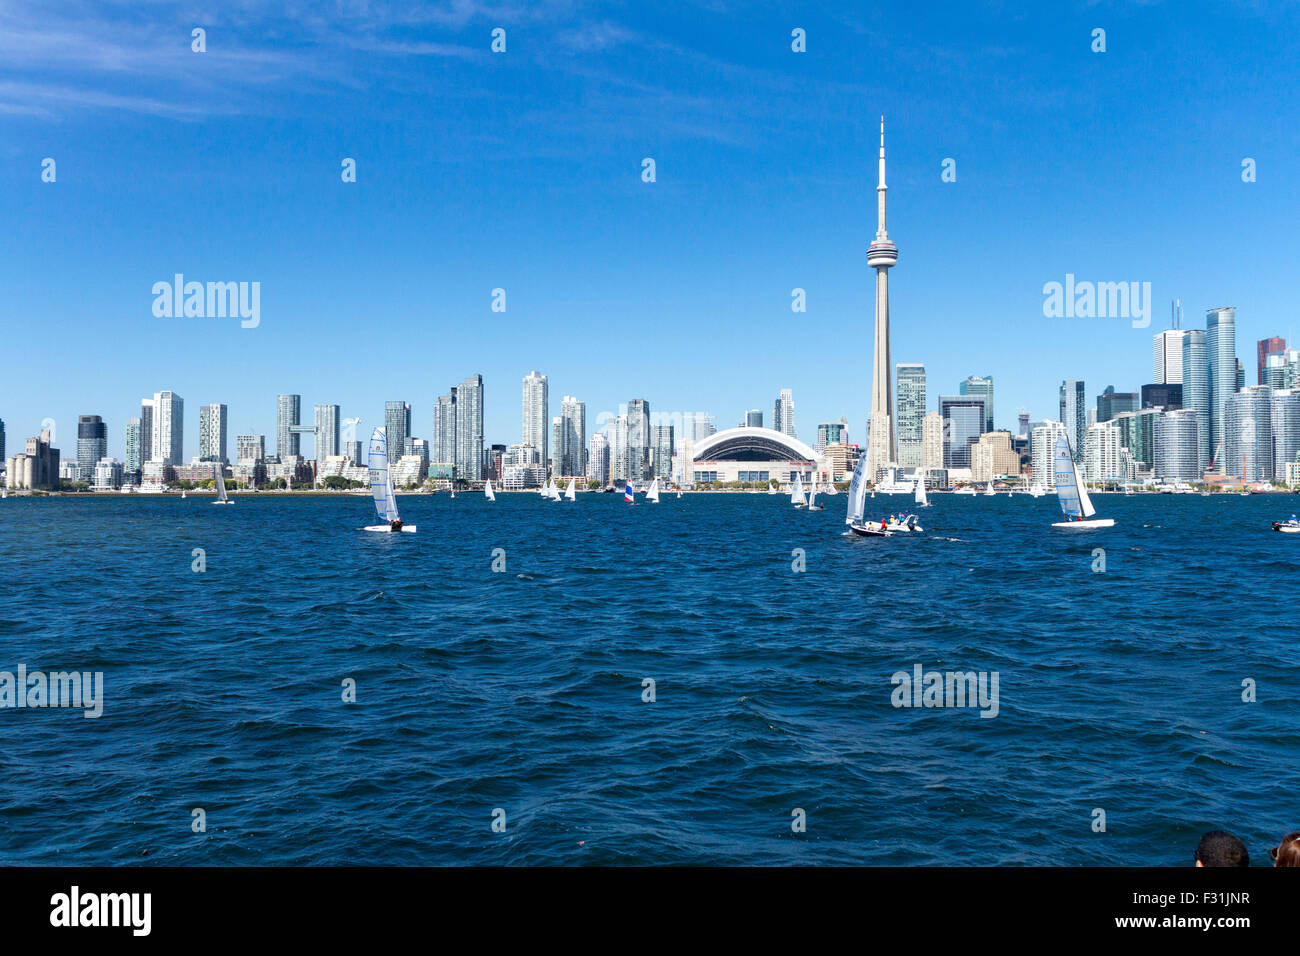 Toronto City Skyline showing Rogers Centre and CN Tower and sailboats along Lake Ontario in Canada Stock Photo